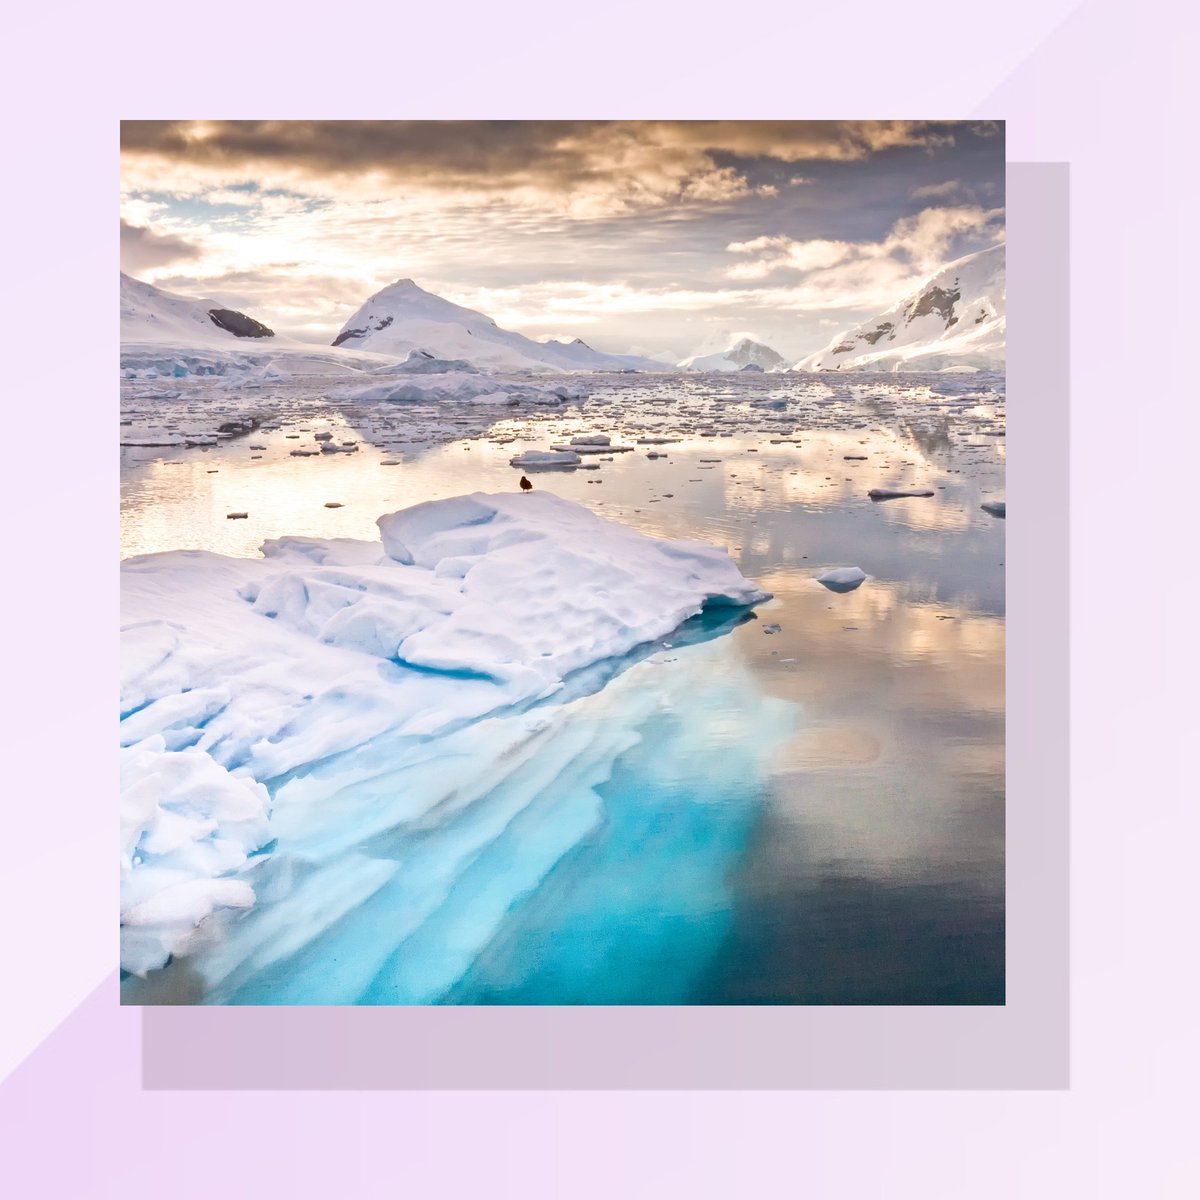 💡 Ever wondered how childhood traits influence our adult learning journey? This article by @Area9Lyceum uncovers the secrets behind this connection, featuring an expedition to Antarctica through the lens of a world-class photographer! ❄️ Read more 👉 ow.ly/tiqw50RoNXS